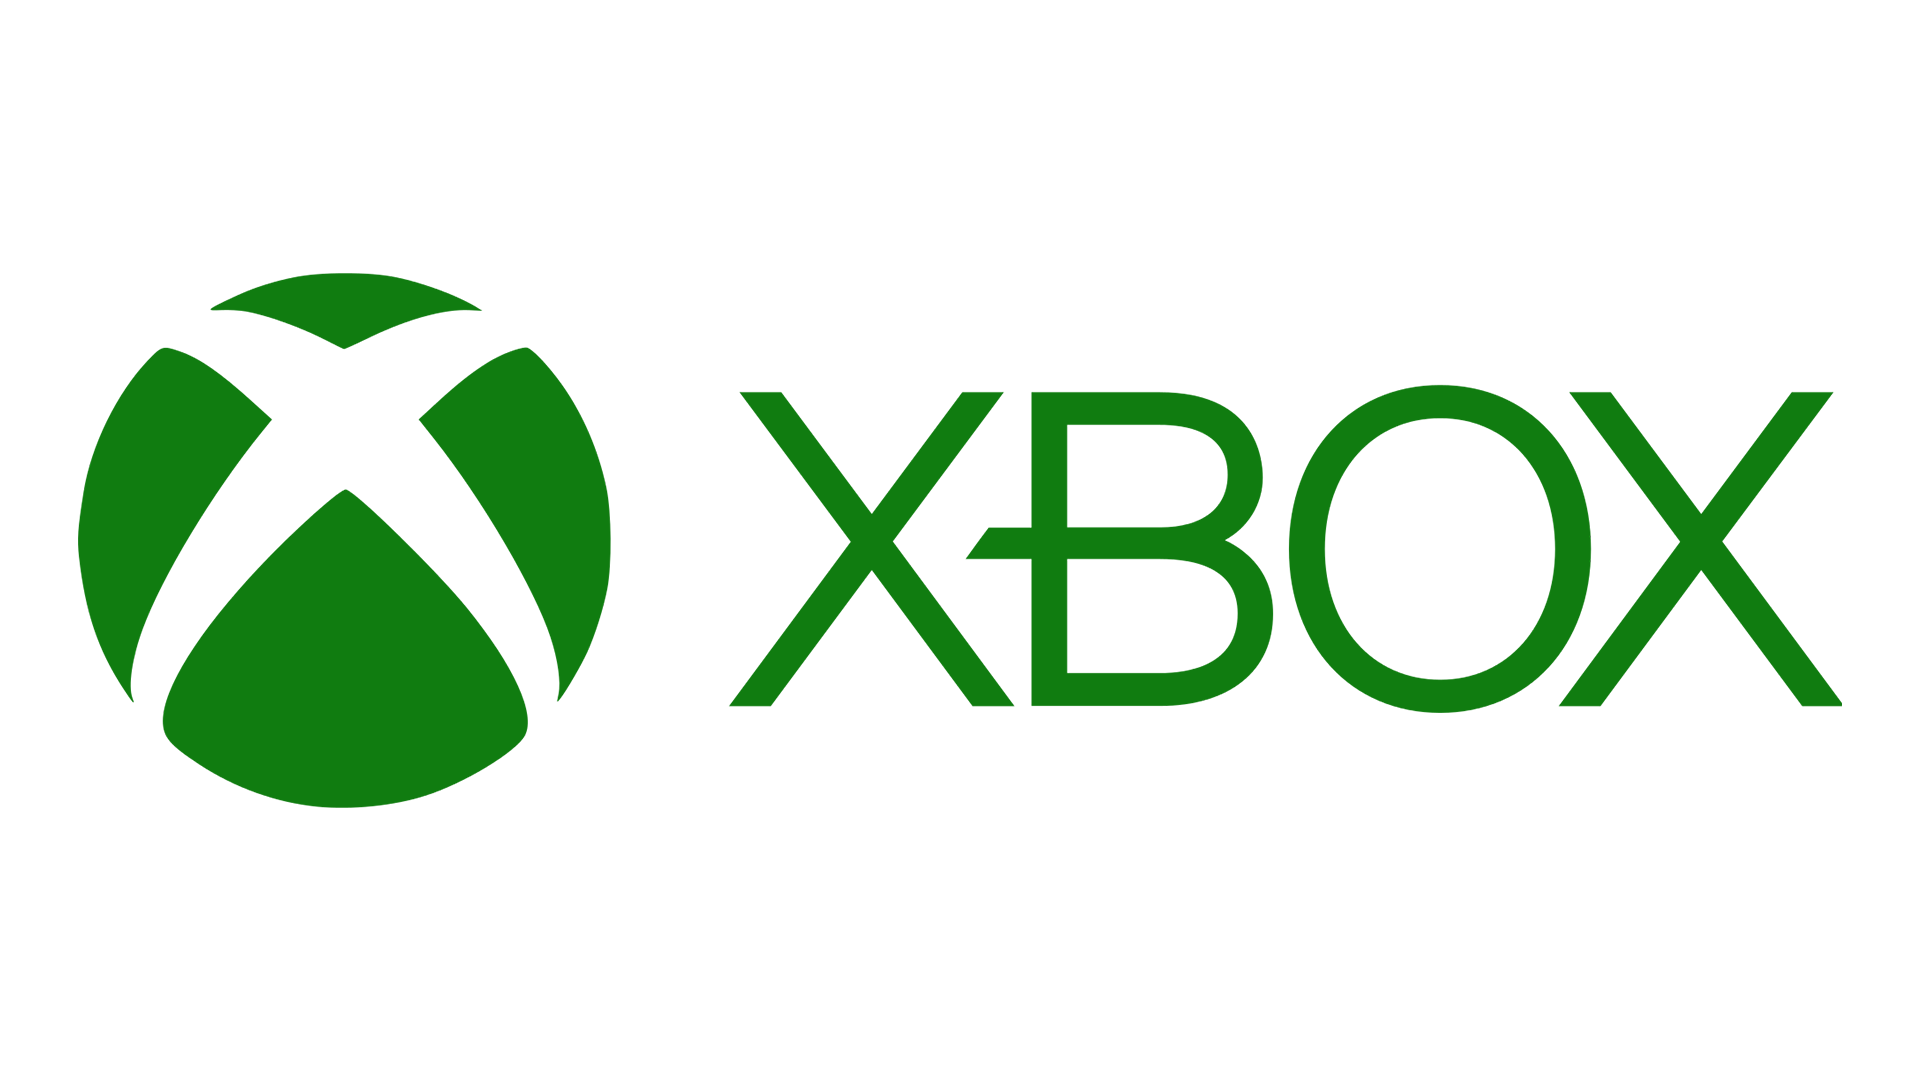 Report: Next-Generation Xbox, 'Scarlett,' Could Be Released in 2020